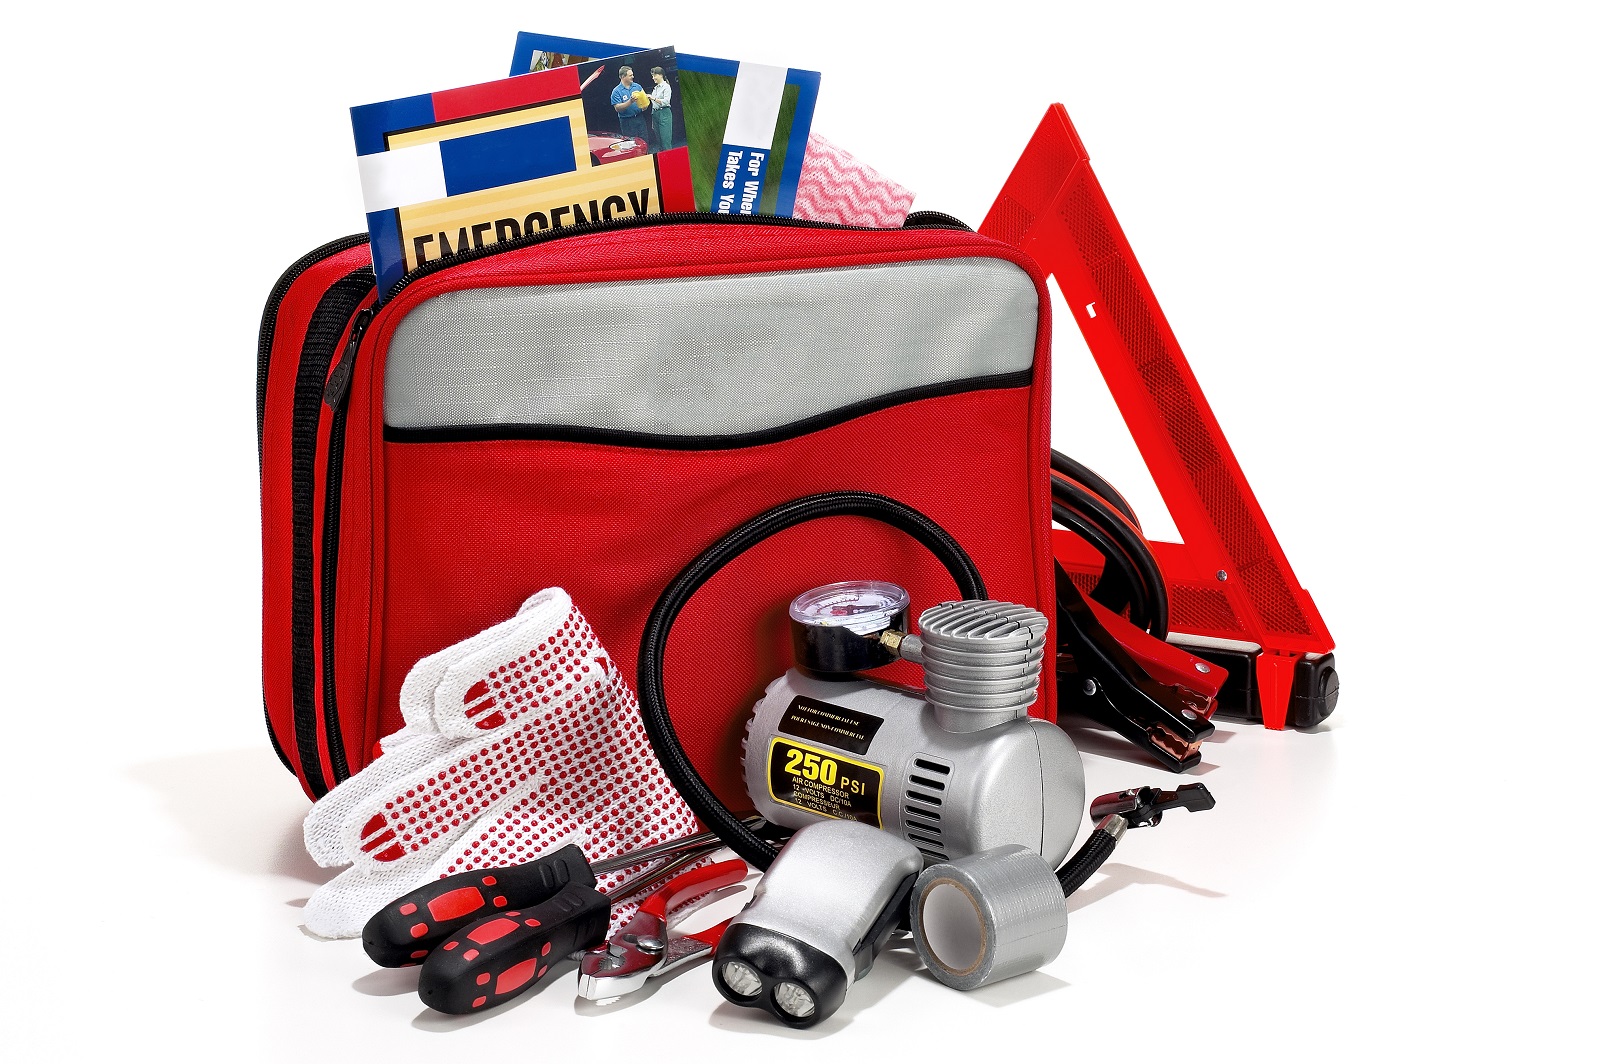 <p class="wp-caption-text">Image Credit: Shutterstock / Michael Kraus</p>  <p><span>Ensure you have an emergency kit that includes a first aid kit, flashlight, jumper cables, and basic tools to handle unexpected situations on the road.</span></p>